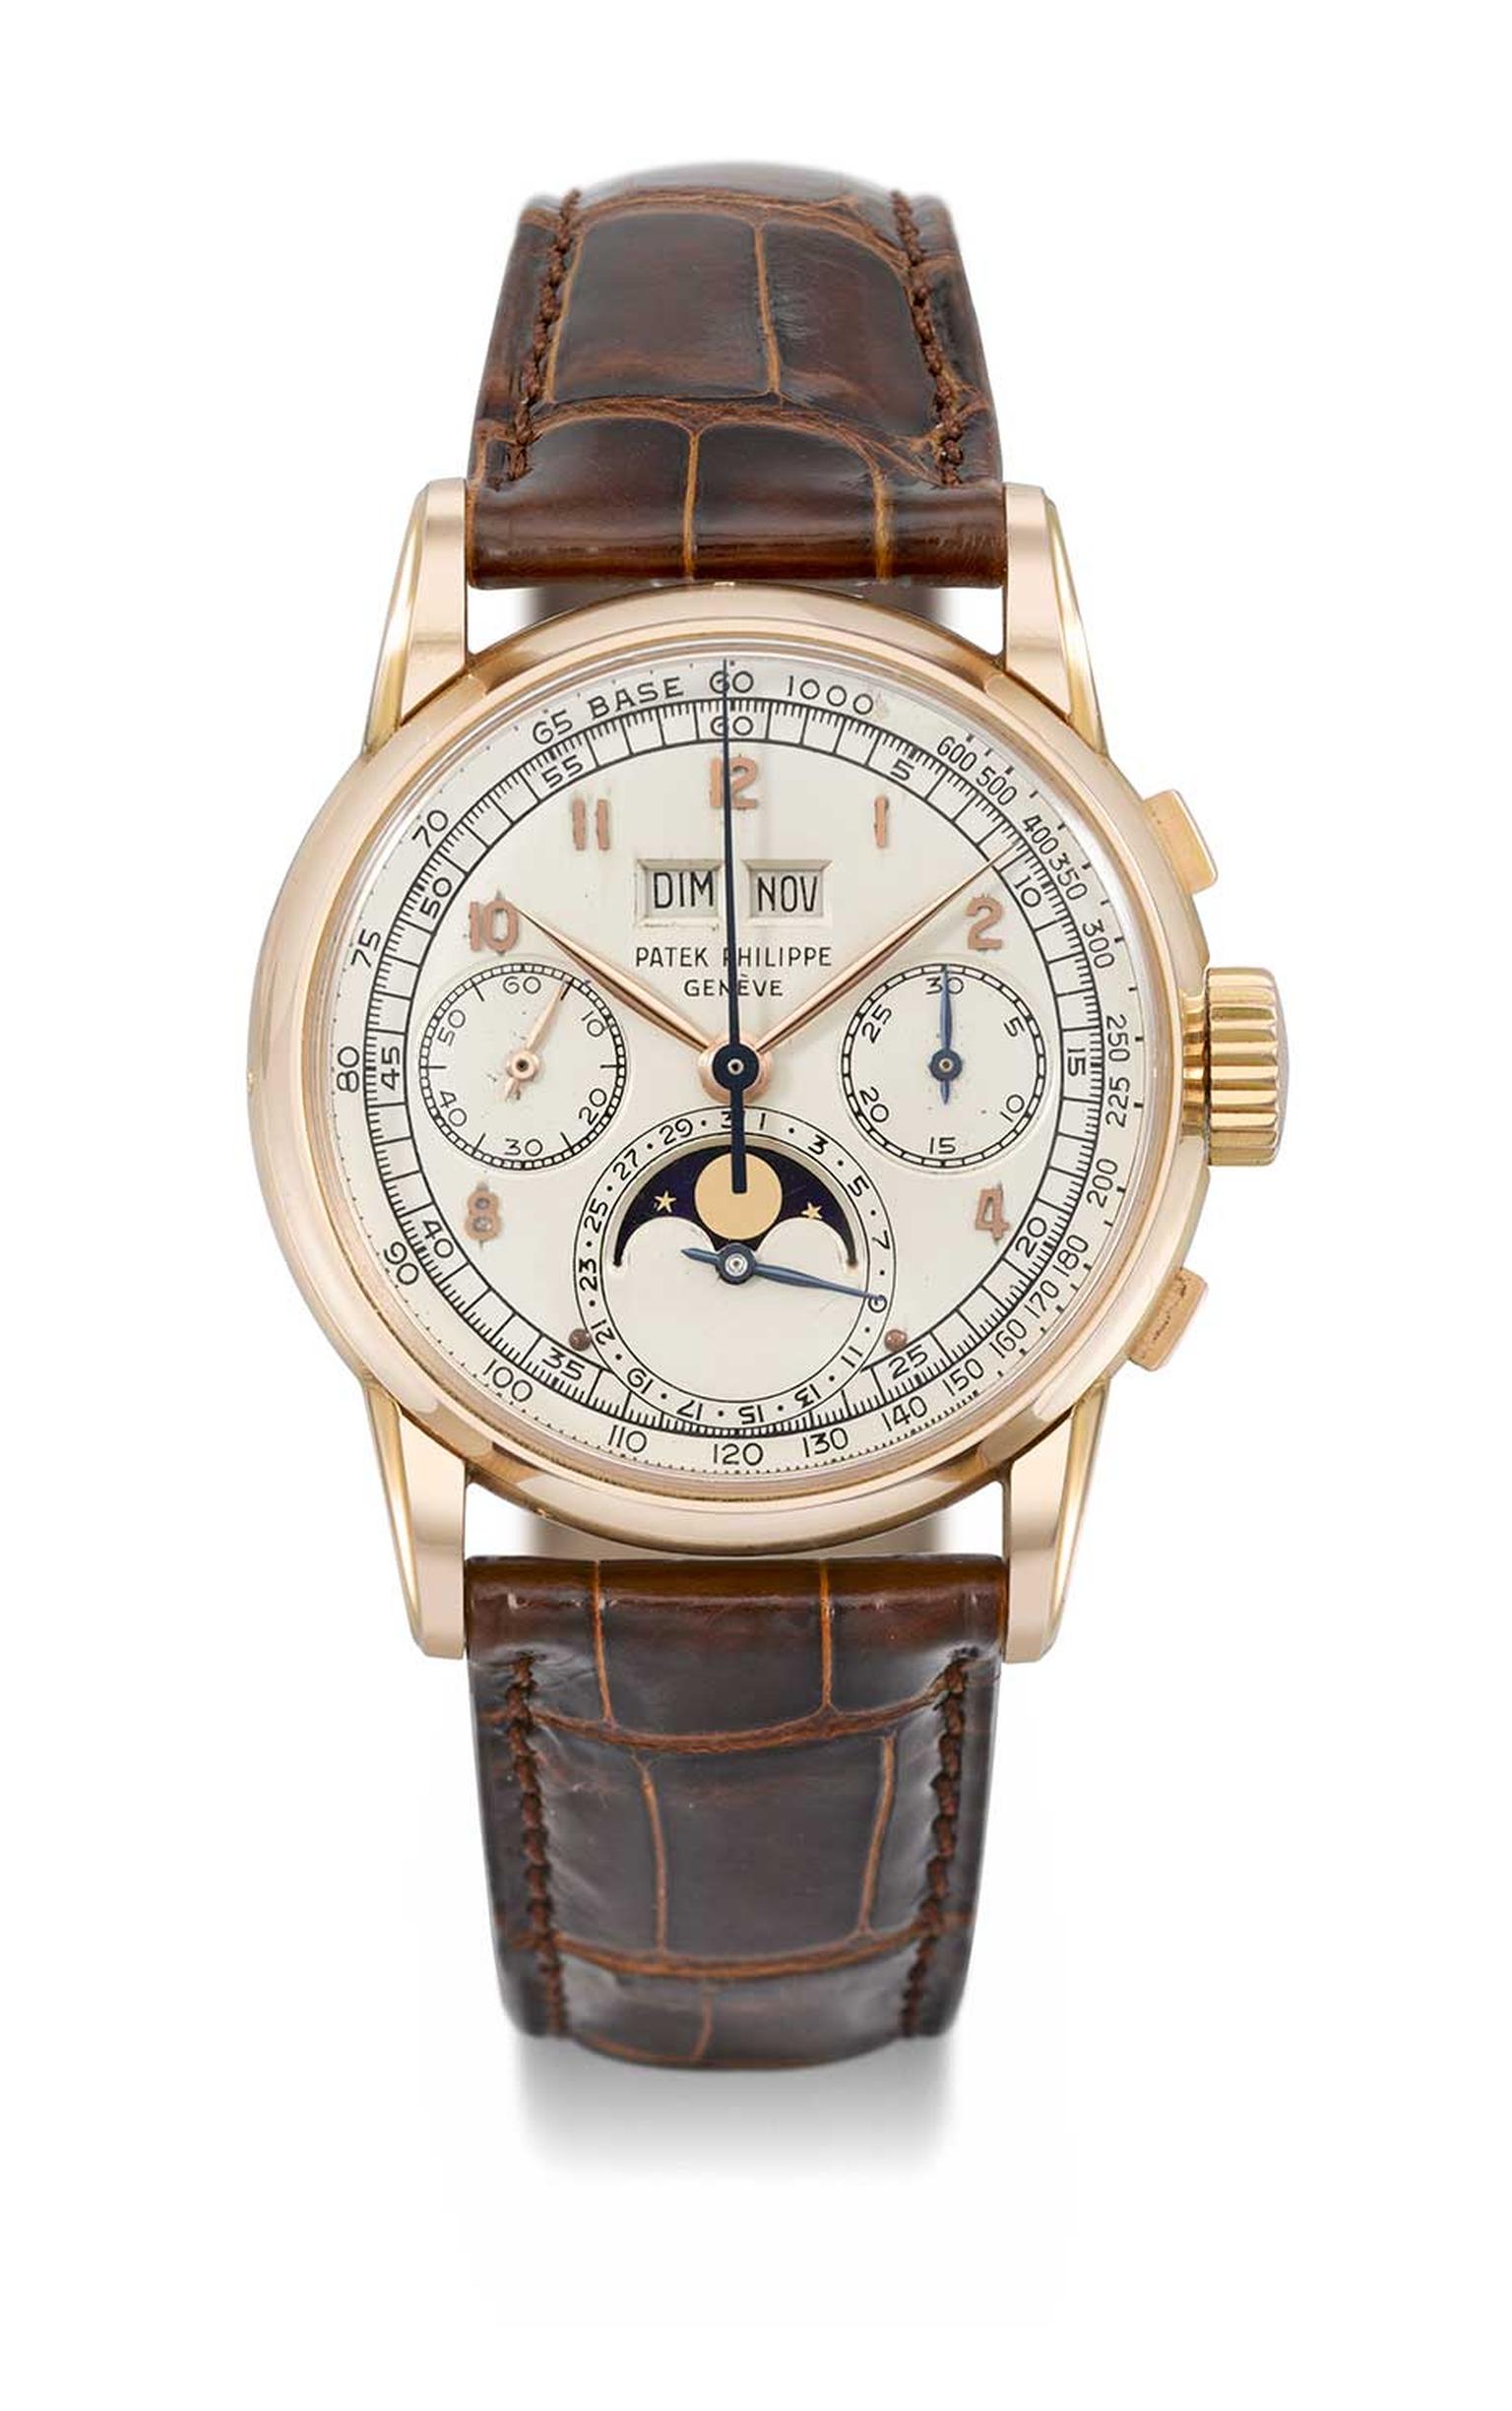 Although the owner has not been revealed in the case of the Patek Philippe watch Reference 2499 First Series, this 1951 perpetual calendar wristwatch is the only pink gold example with English import marks.